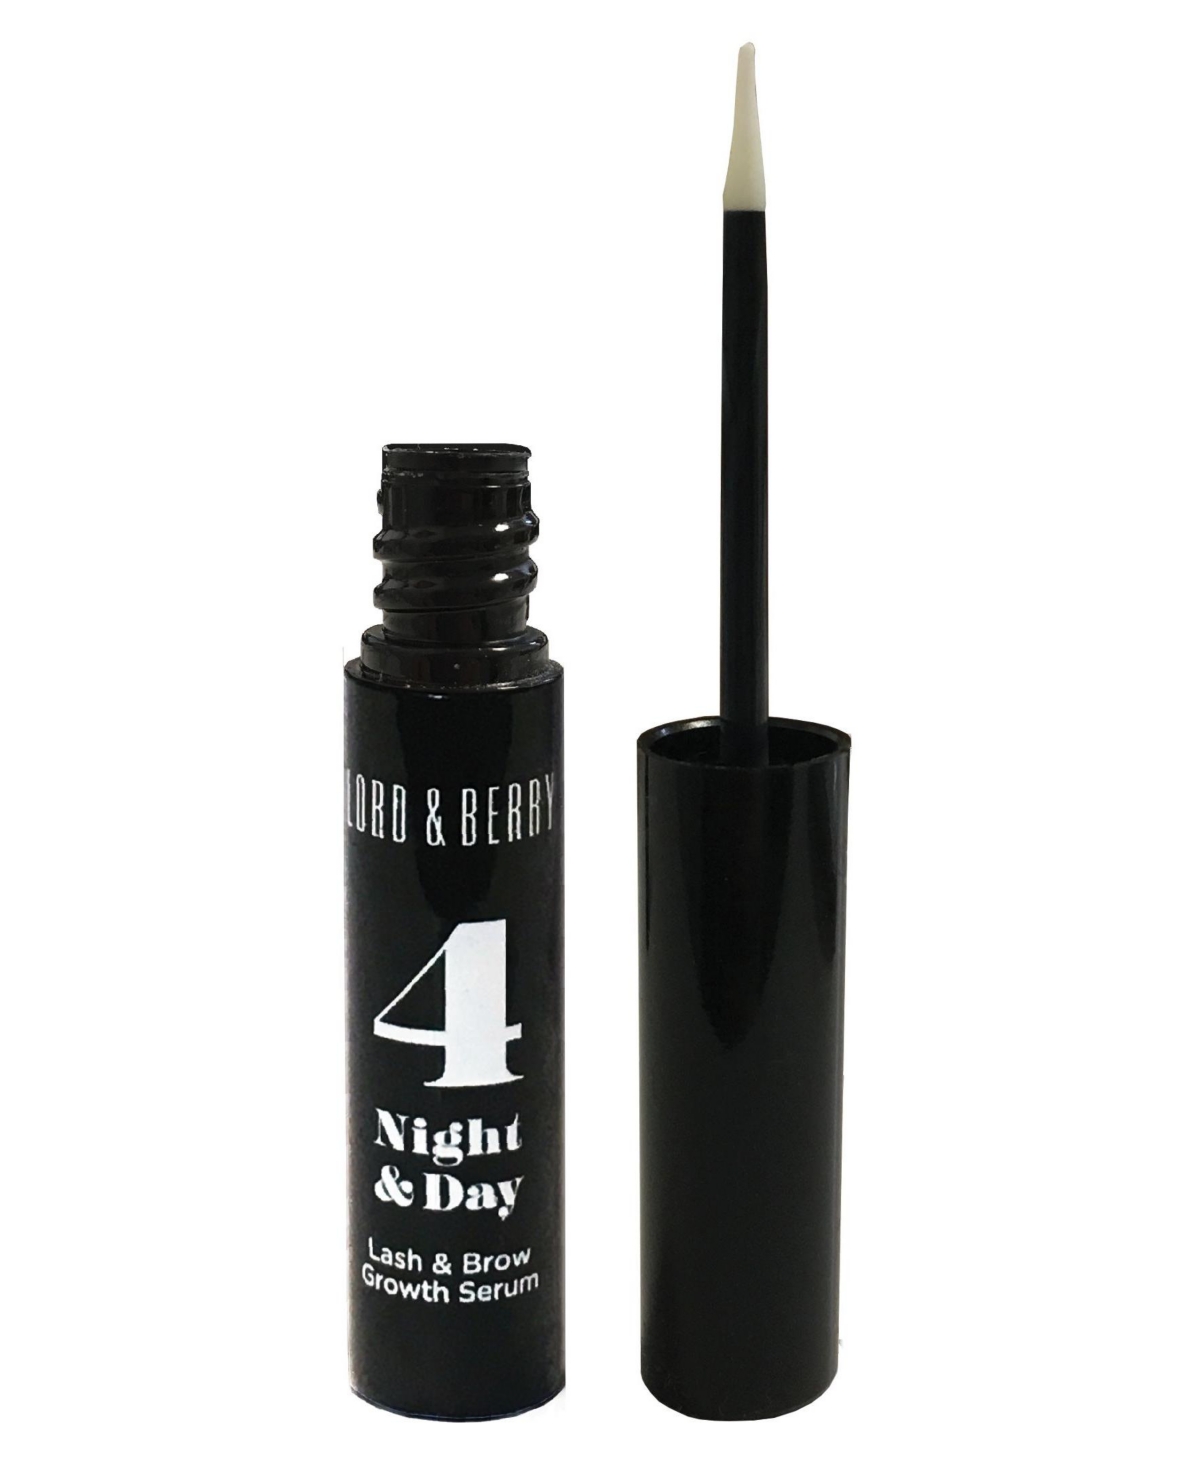 Lord & Berry 4 Night and Day Eye Lash and Brow Serum,...